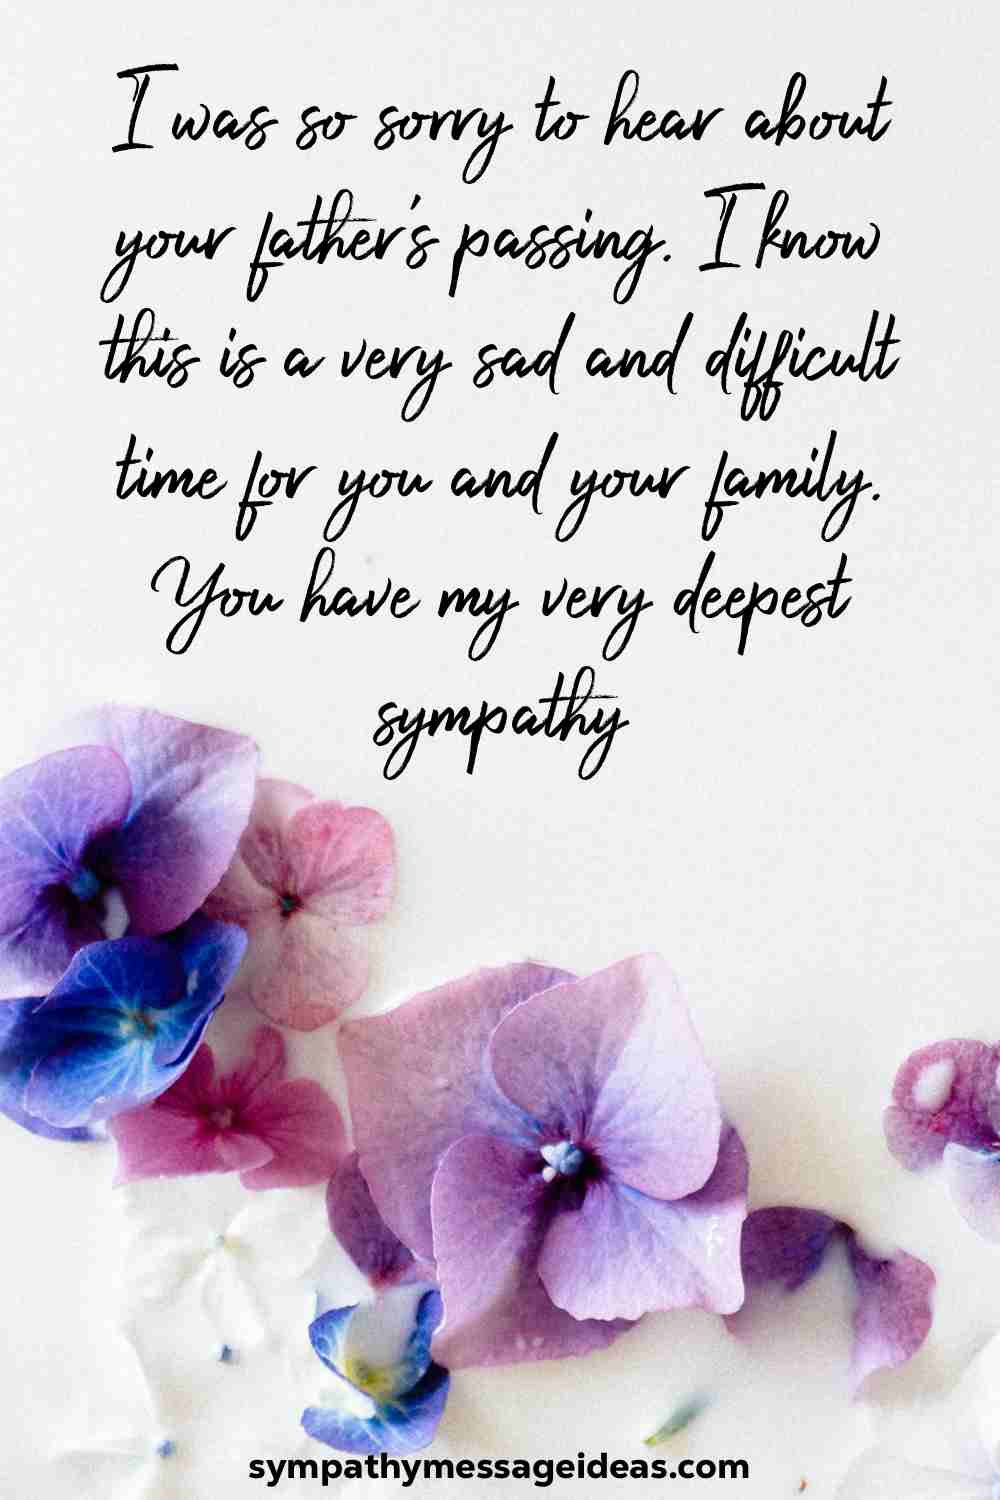 words-of-sympathy-for-loss-of-father-90-heartfelt-messages-sympathy